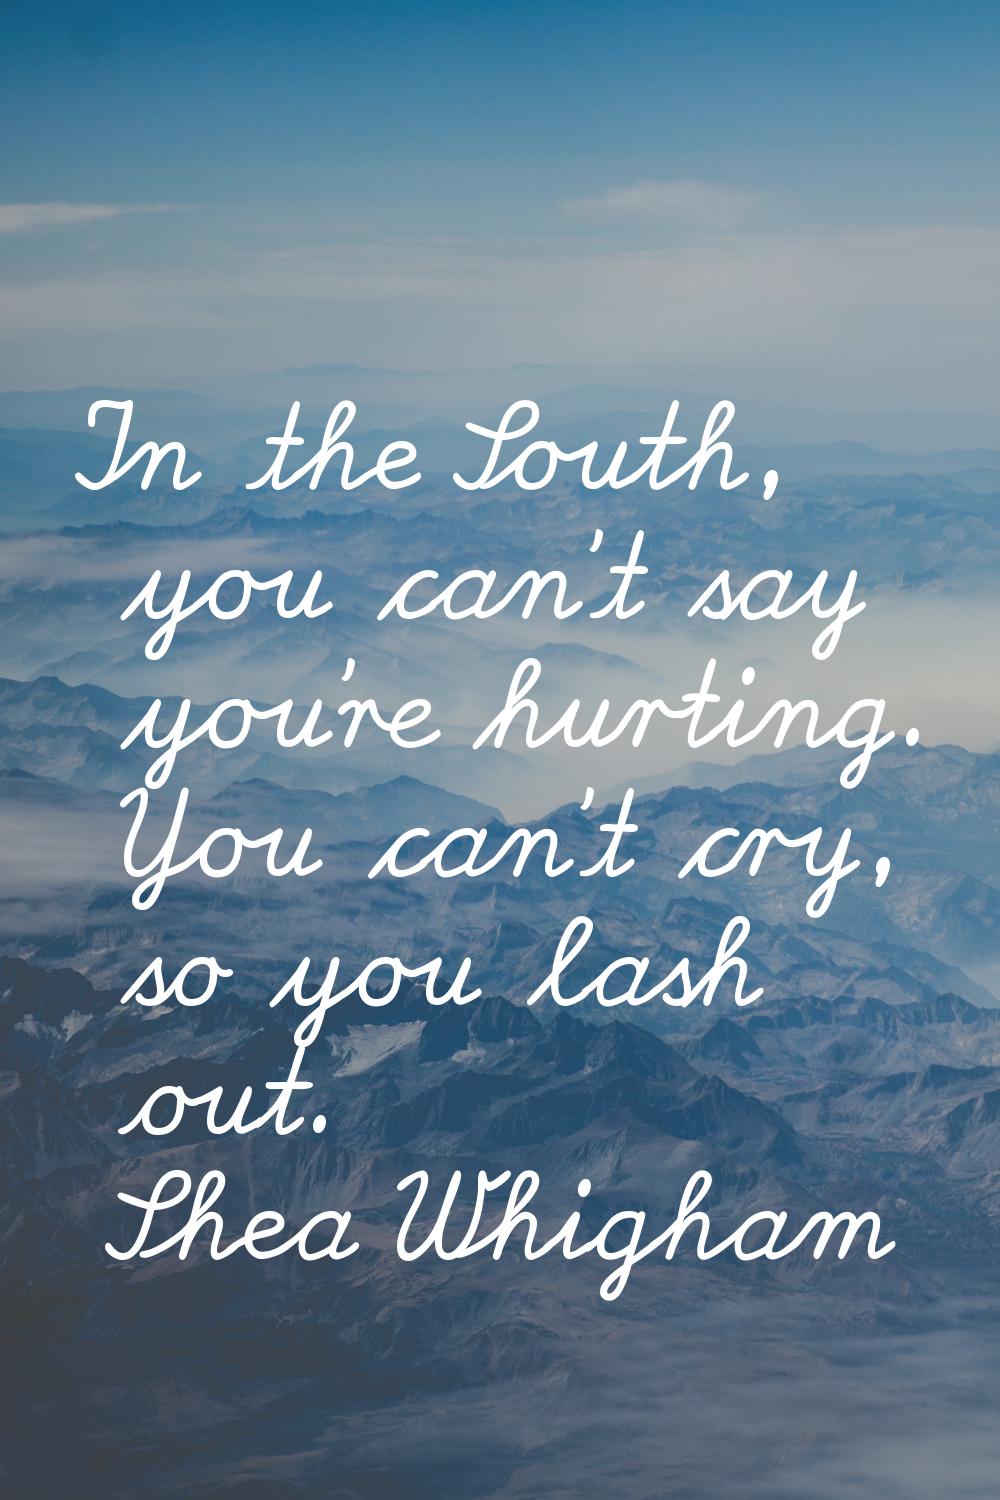 In the South, you can't say you're hurting. You can't cry, so you lash out.